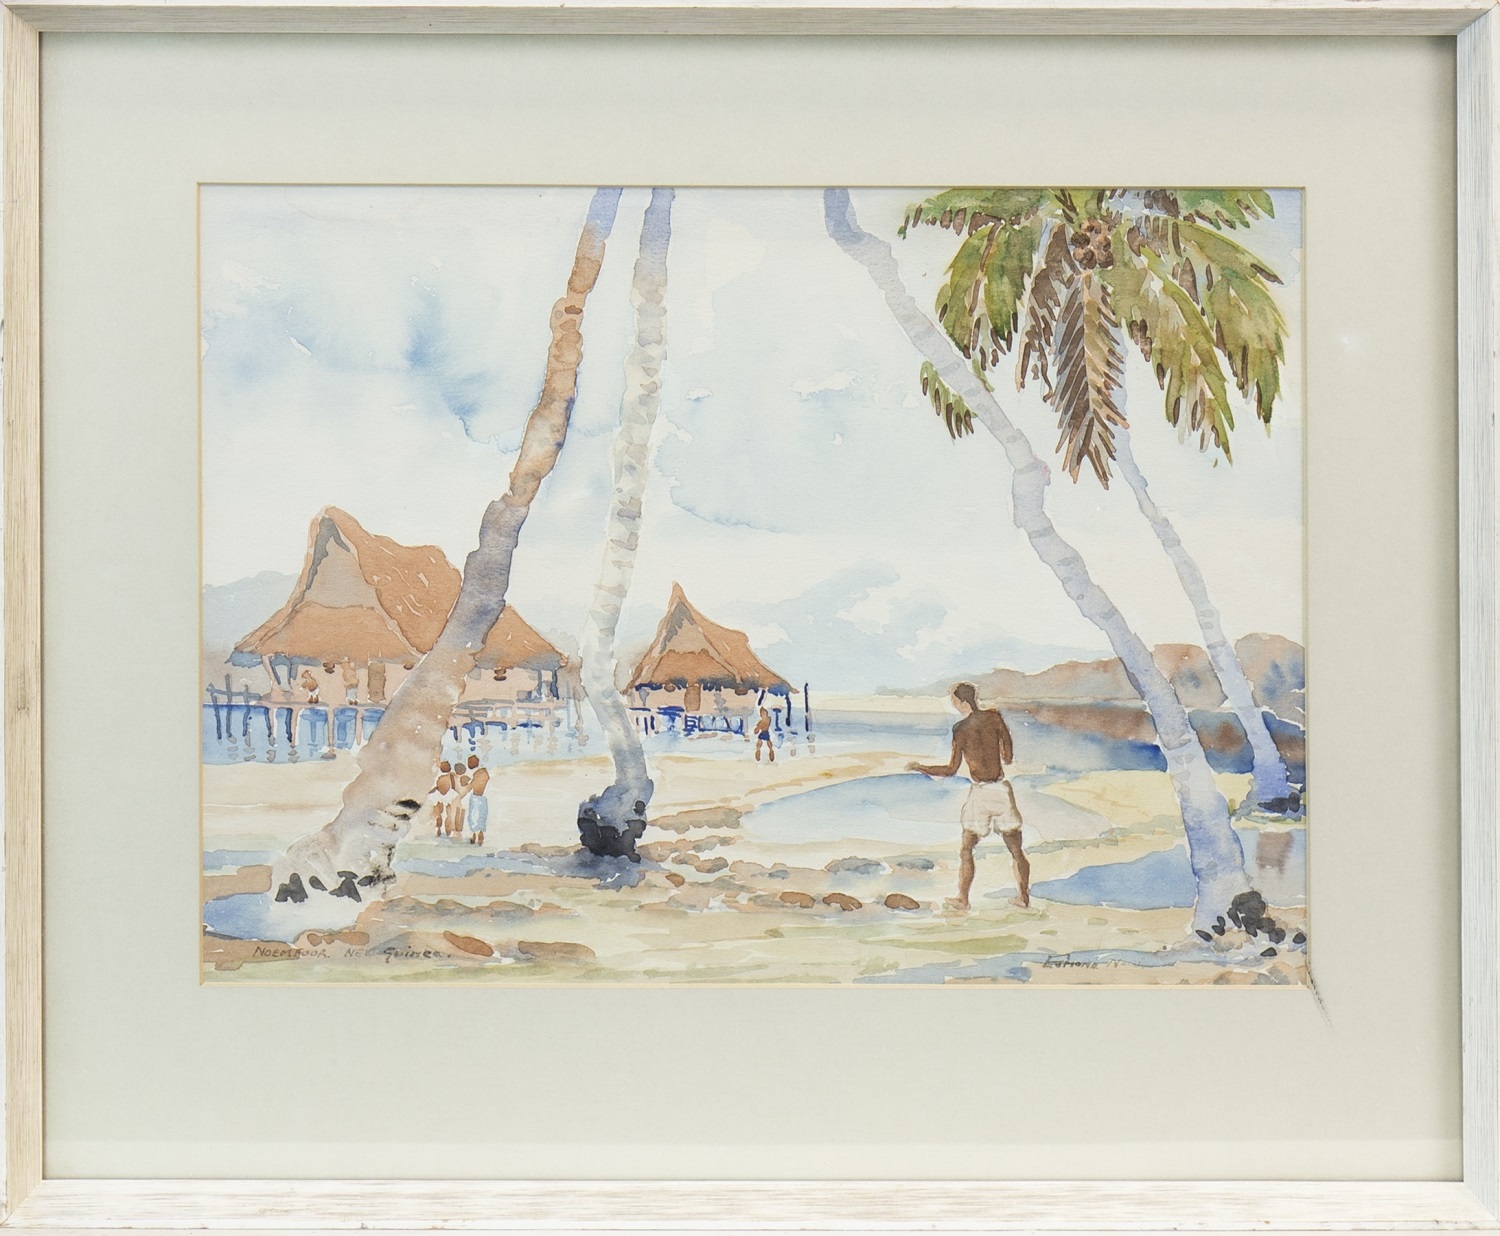 VILLAGE SCENE ON THE NEW GUINEA ISLAND OF NOEMFOOR, A WATERCOLOUR BY DIANA ESMOND - Image 2 of 2